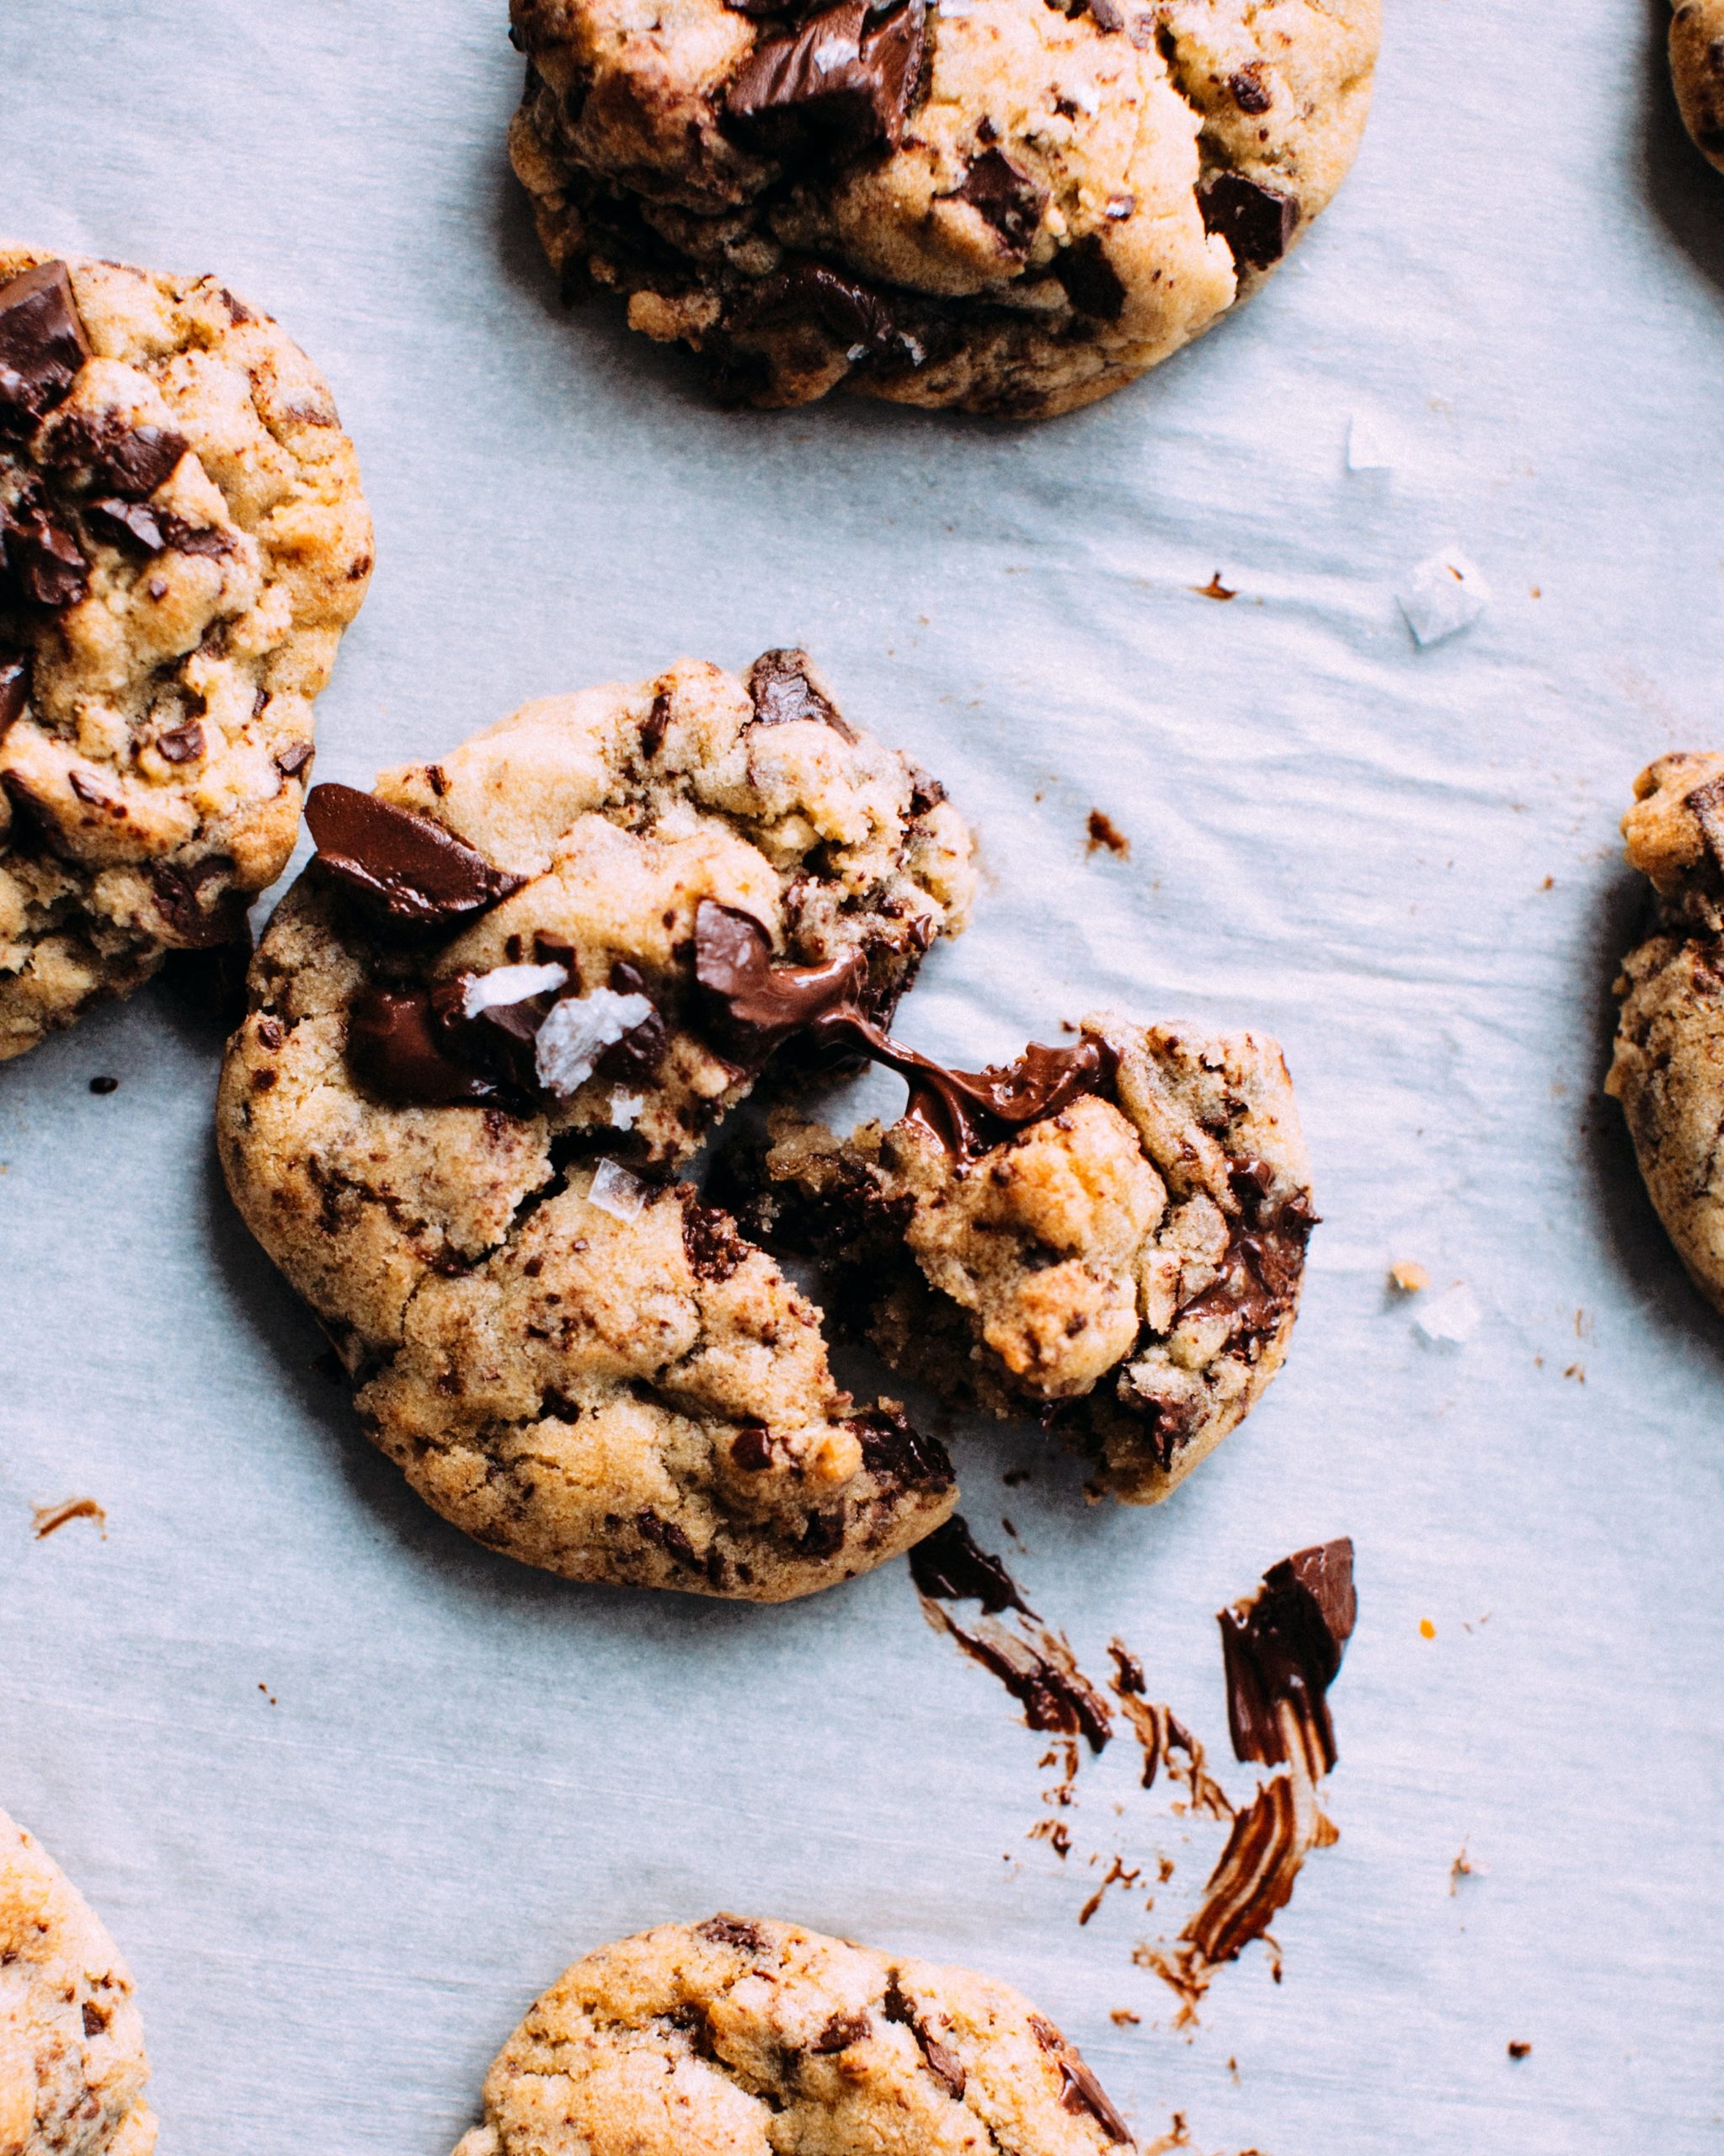 Recipe: Spiced + Nutty Chocolate Chip Cookies